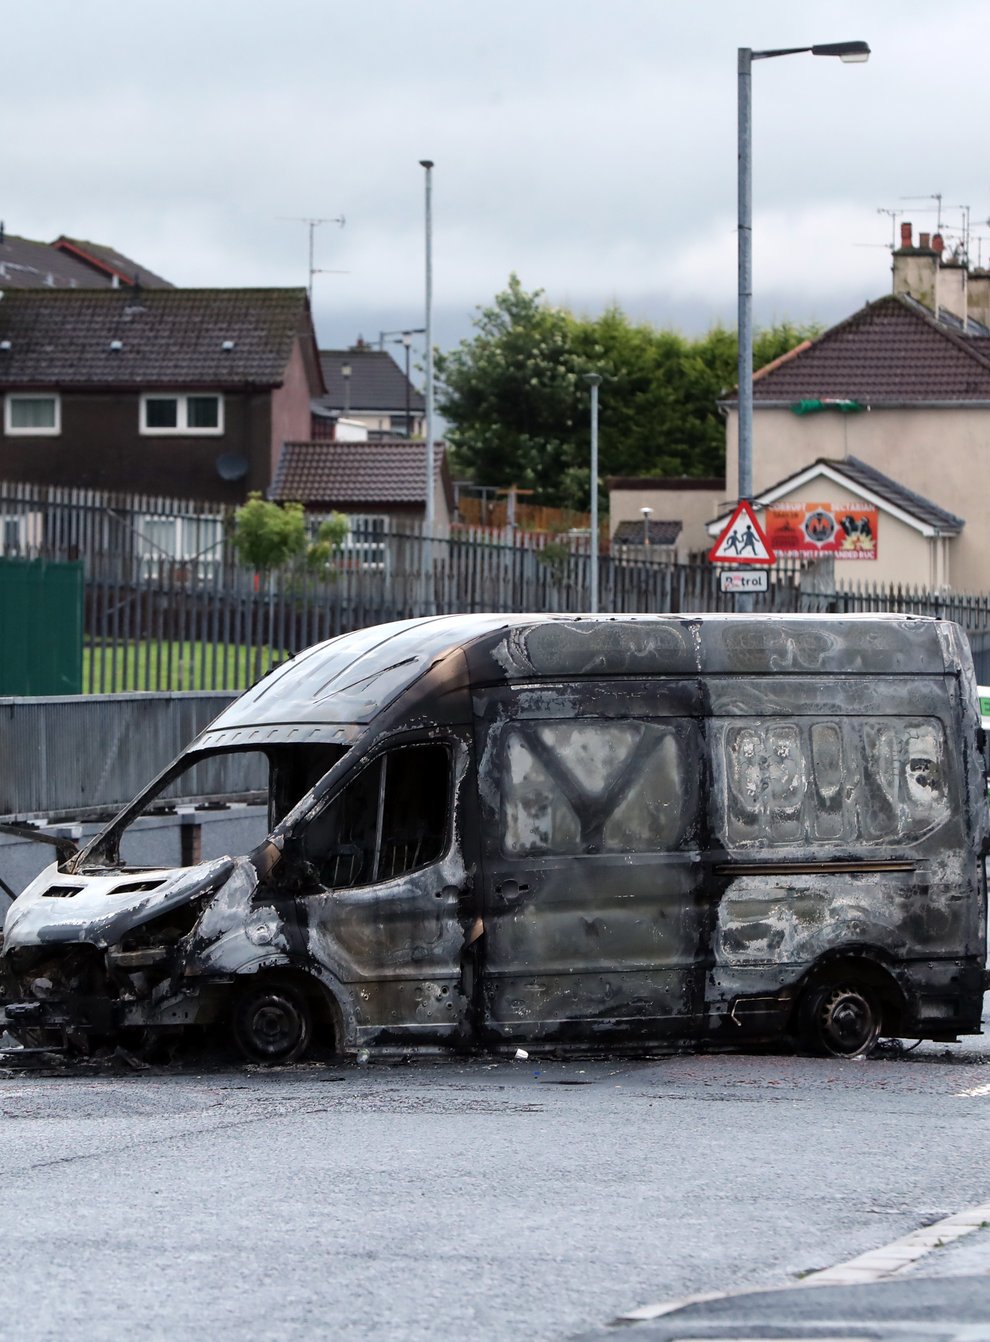 A burnt-out van in the Creggan area of Londonderry as the coffin of John Hume is taken to St Eugene’s Cathedral ahead of his funeral